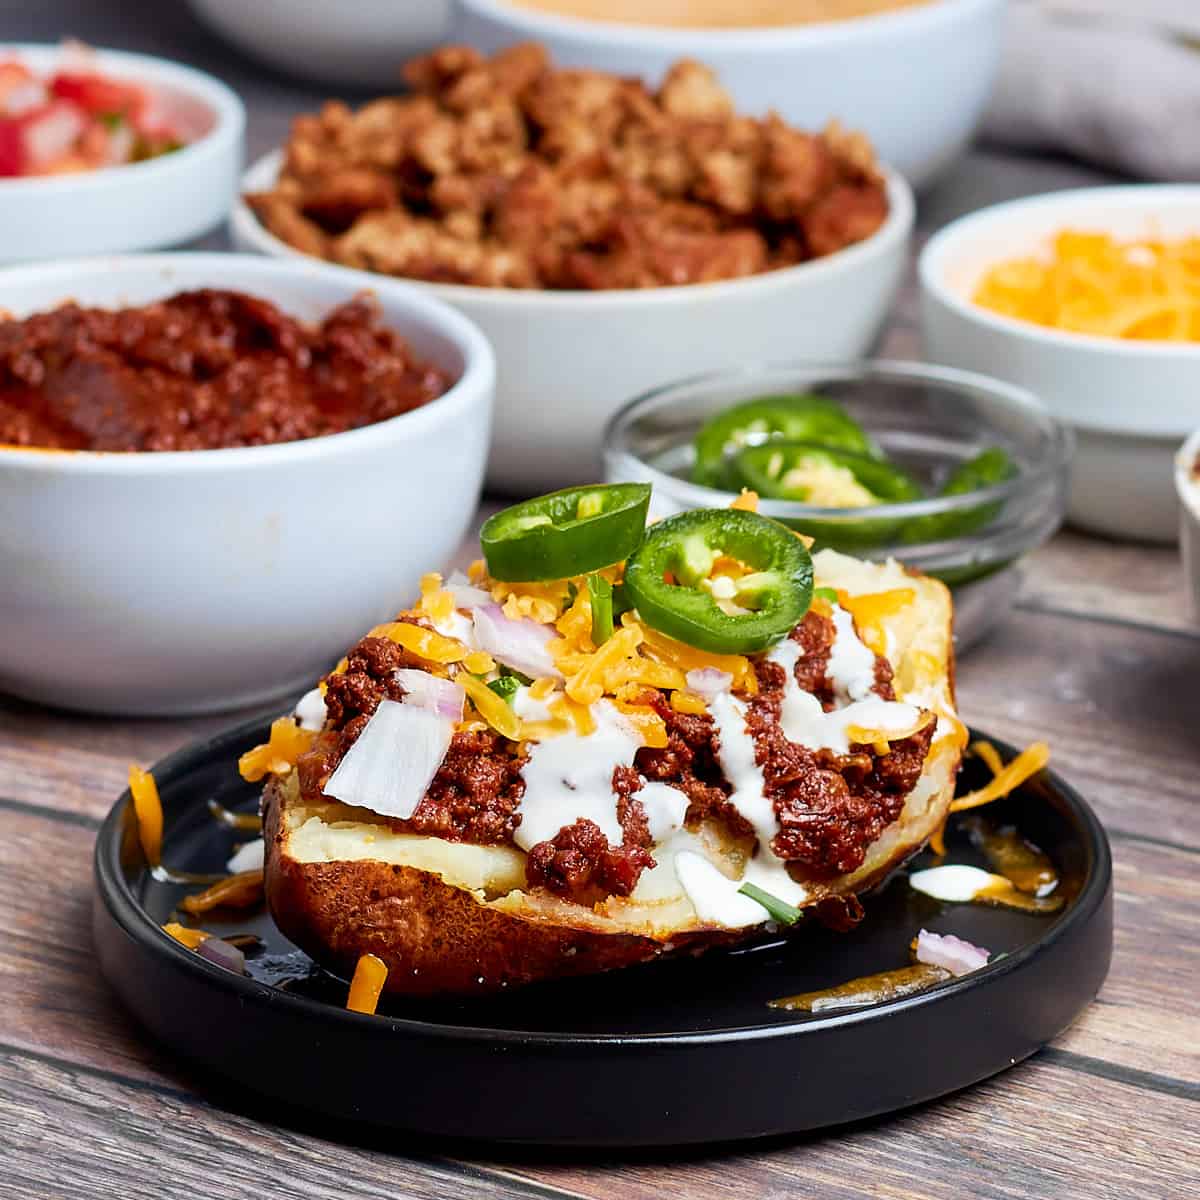 chili cheese baked potato on a black plate